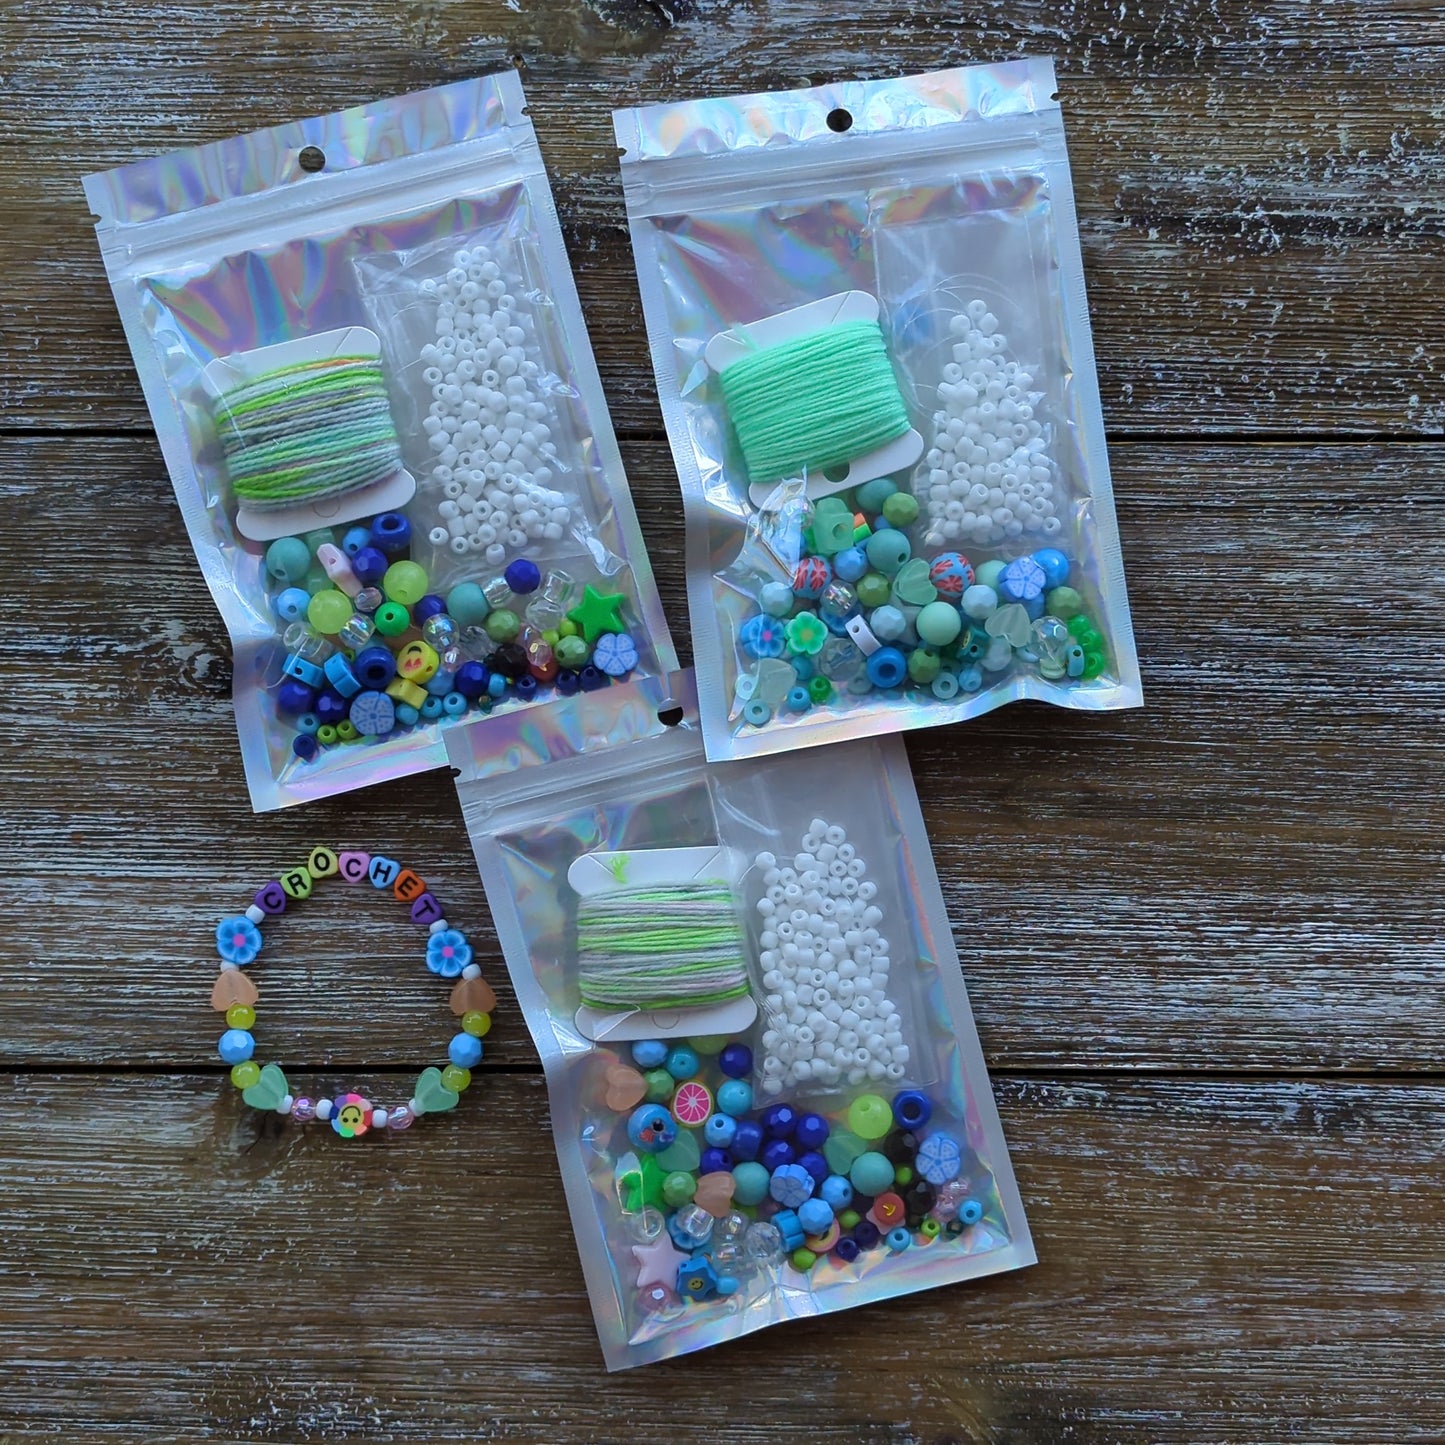 Friendship Bracelet Kits - Choose Your Own Words! - Ready to Ship